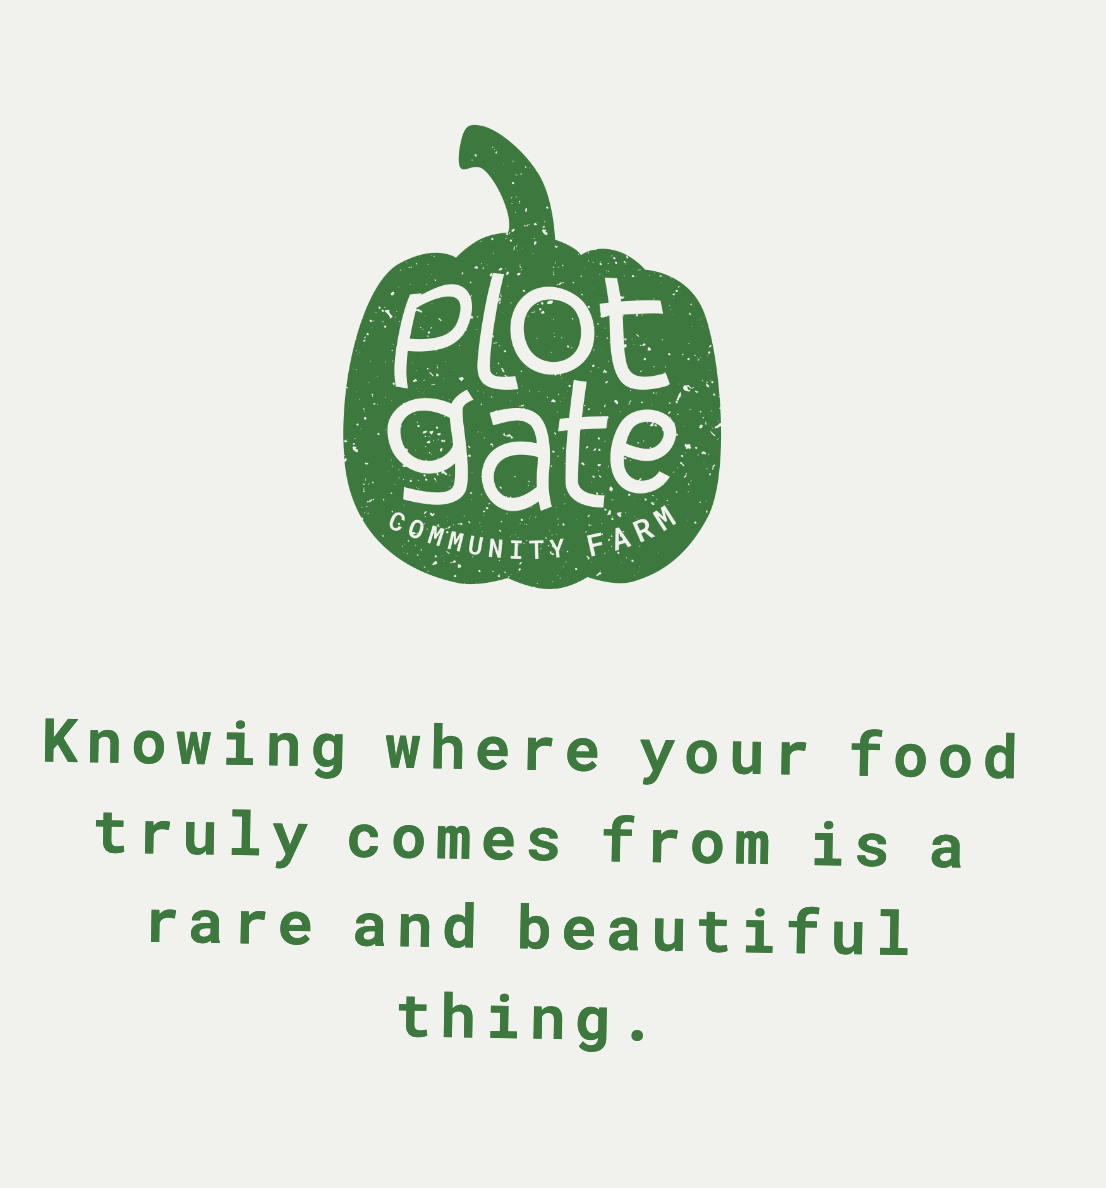 Plotgate logo "Knowing where your food comes from is a rare and beautiful thing."